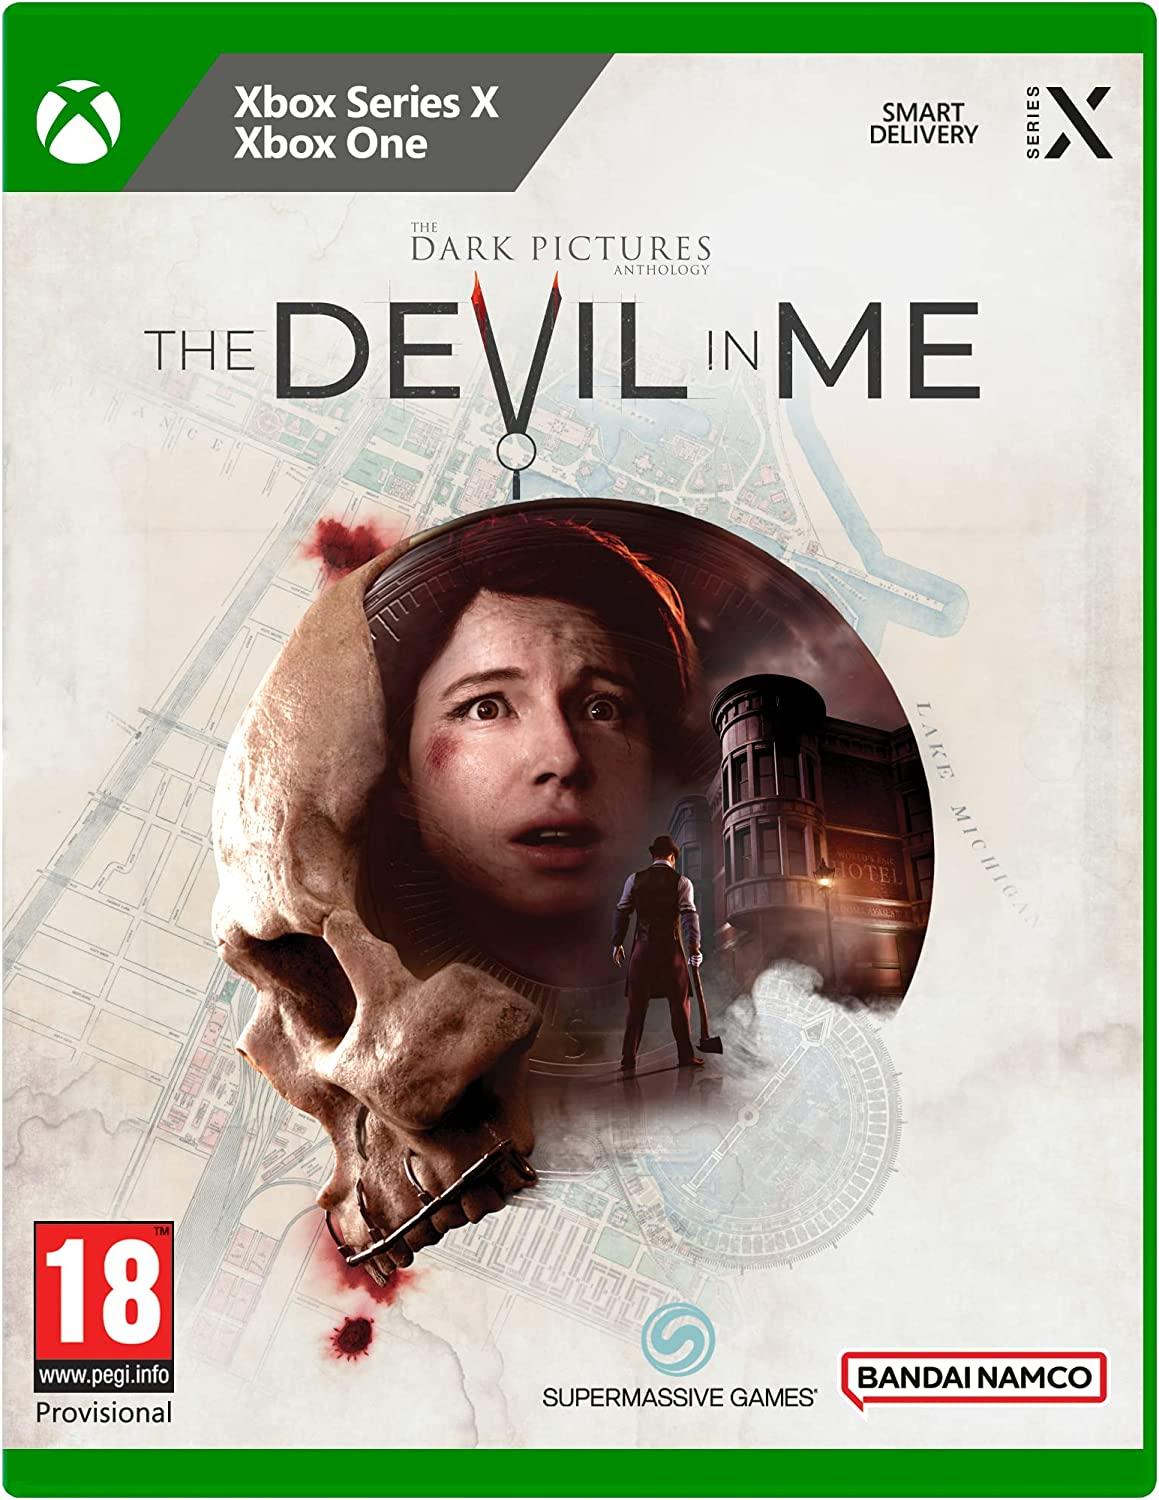 The Dark Pictures Anthology: The Devil In Me (Xbox Series X) (Xbox One) - GameStore.mt | Powered by Flutisat